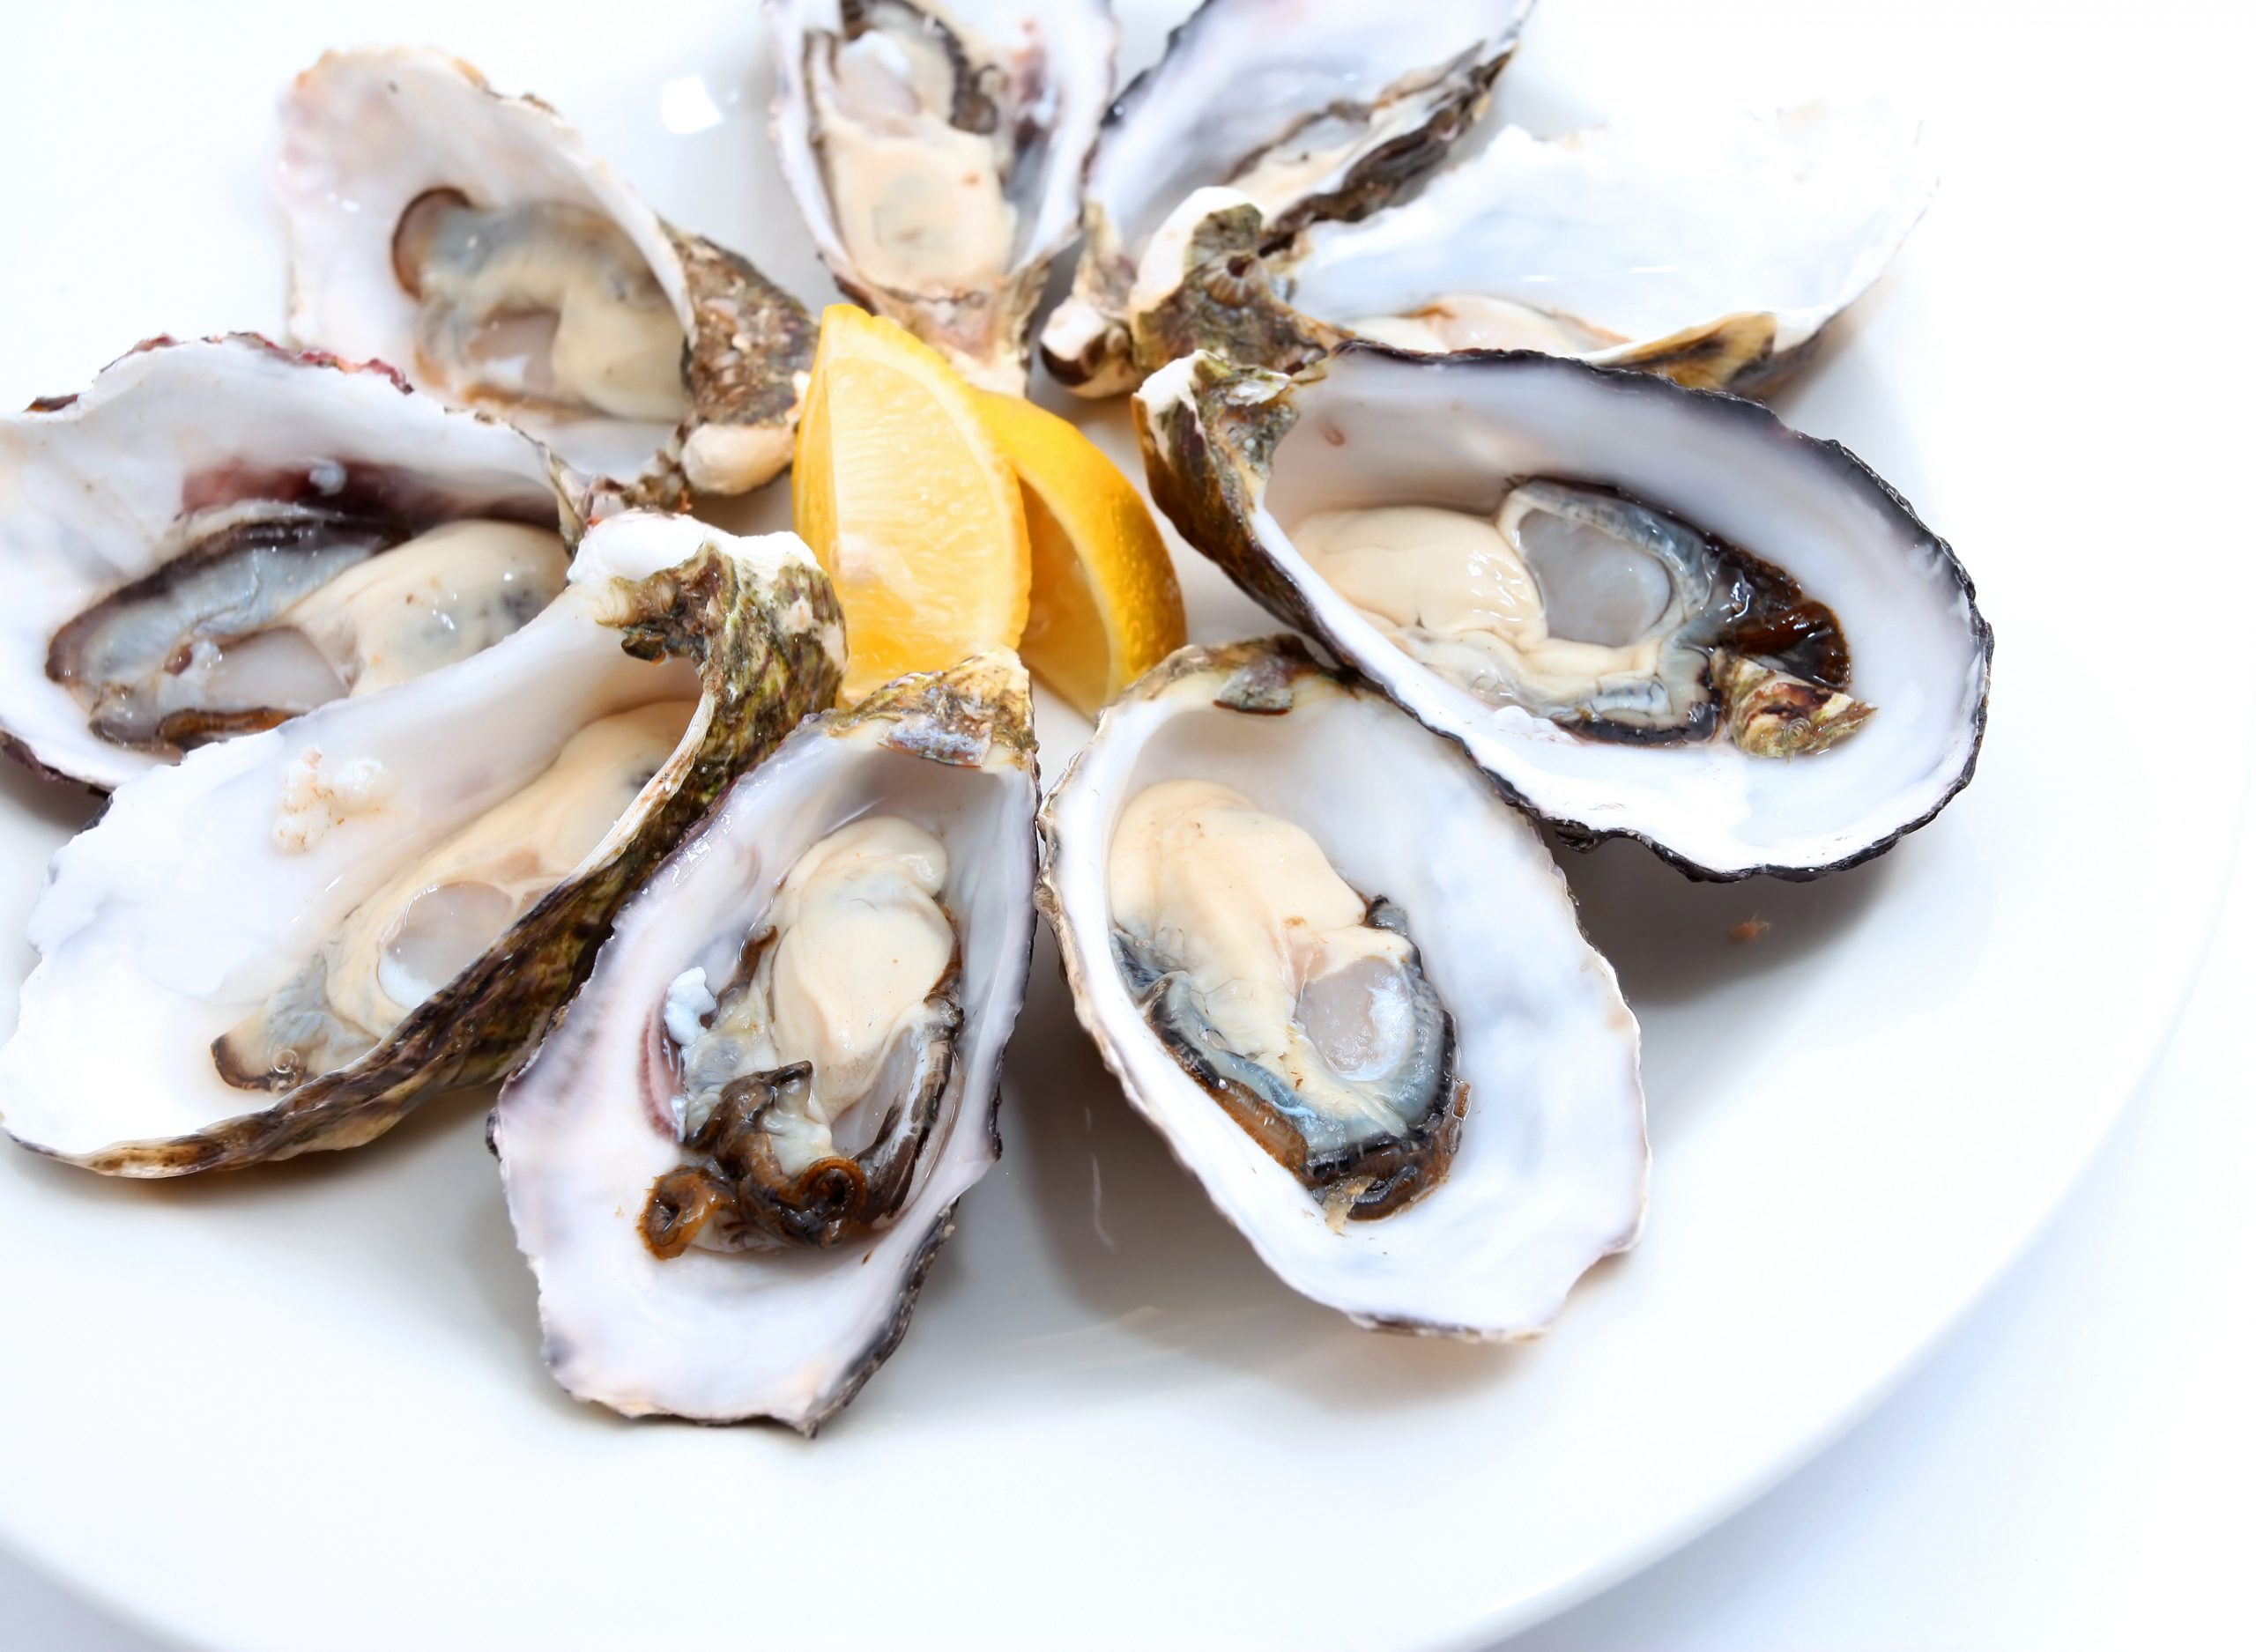 WIN 5 dozen deliciouuuus oysters to share with your loved ones, thanks to Mooka Oysters